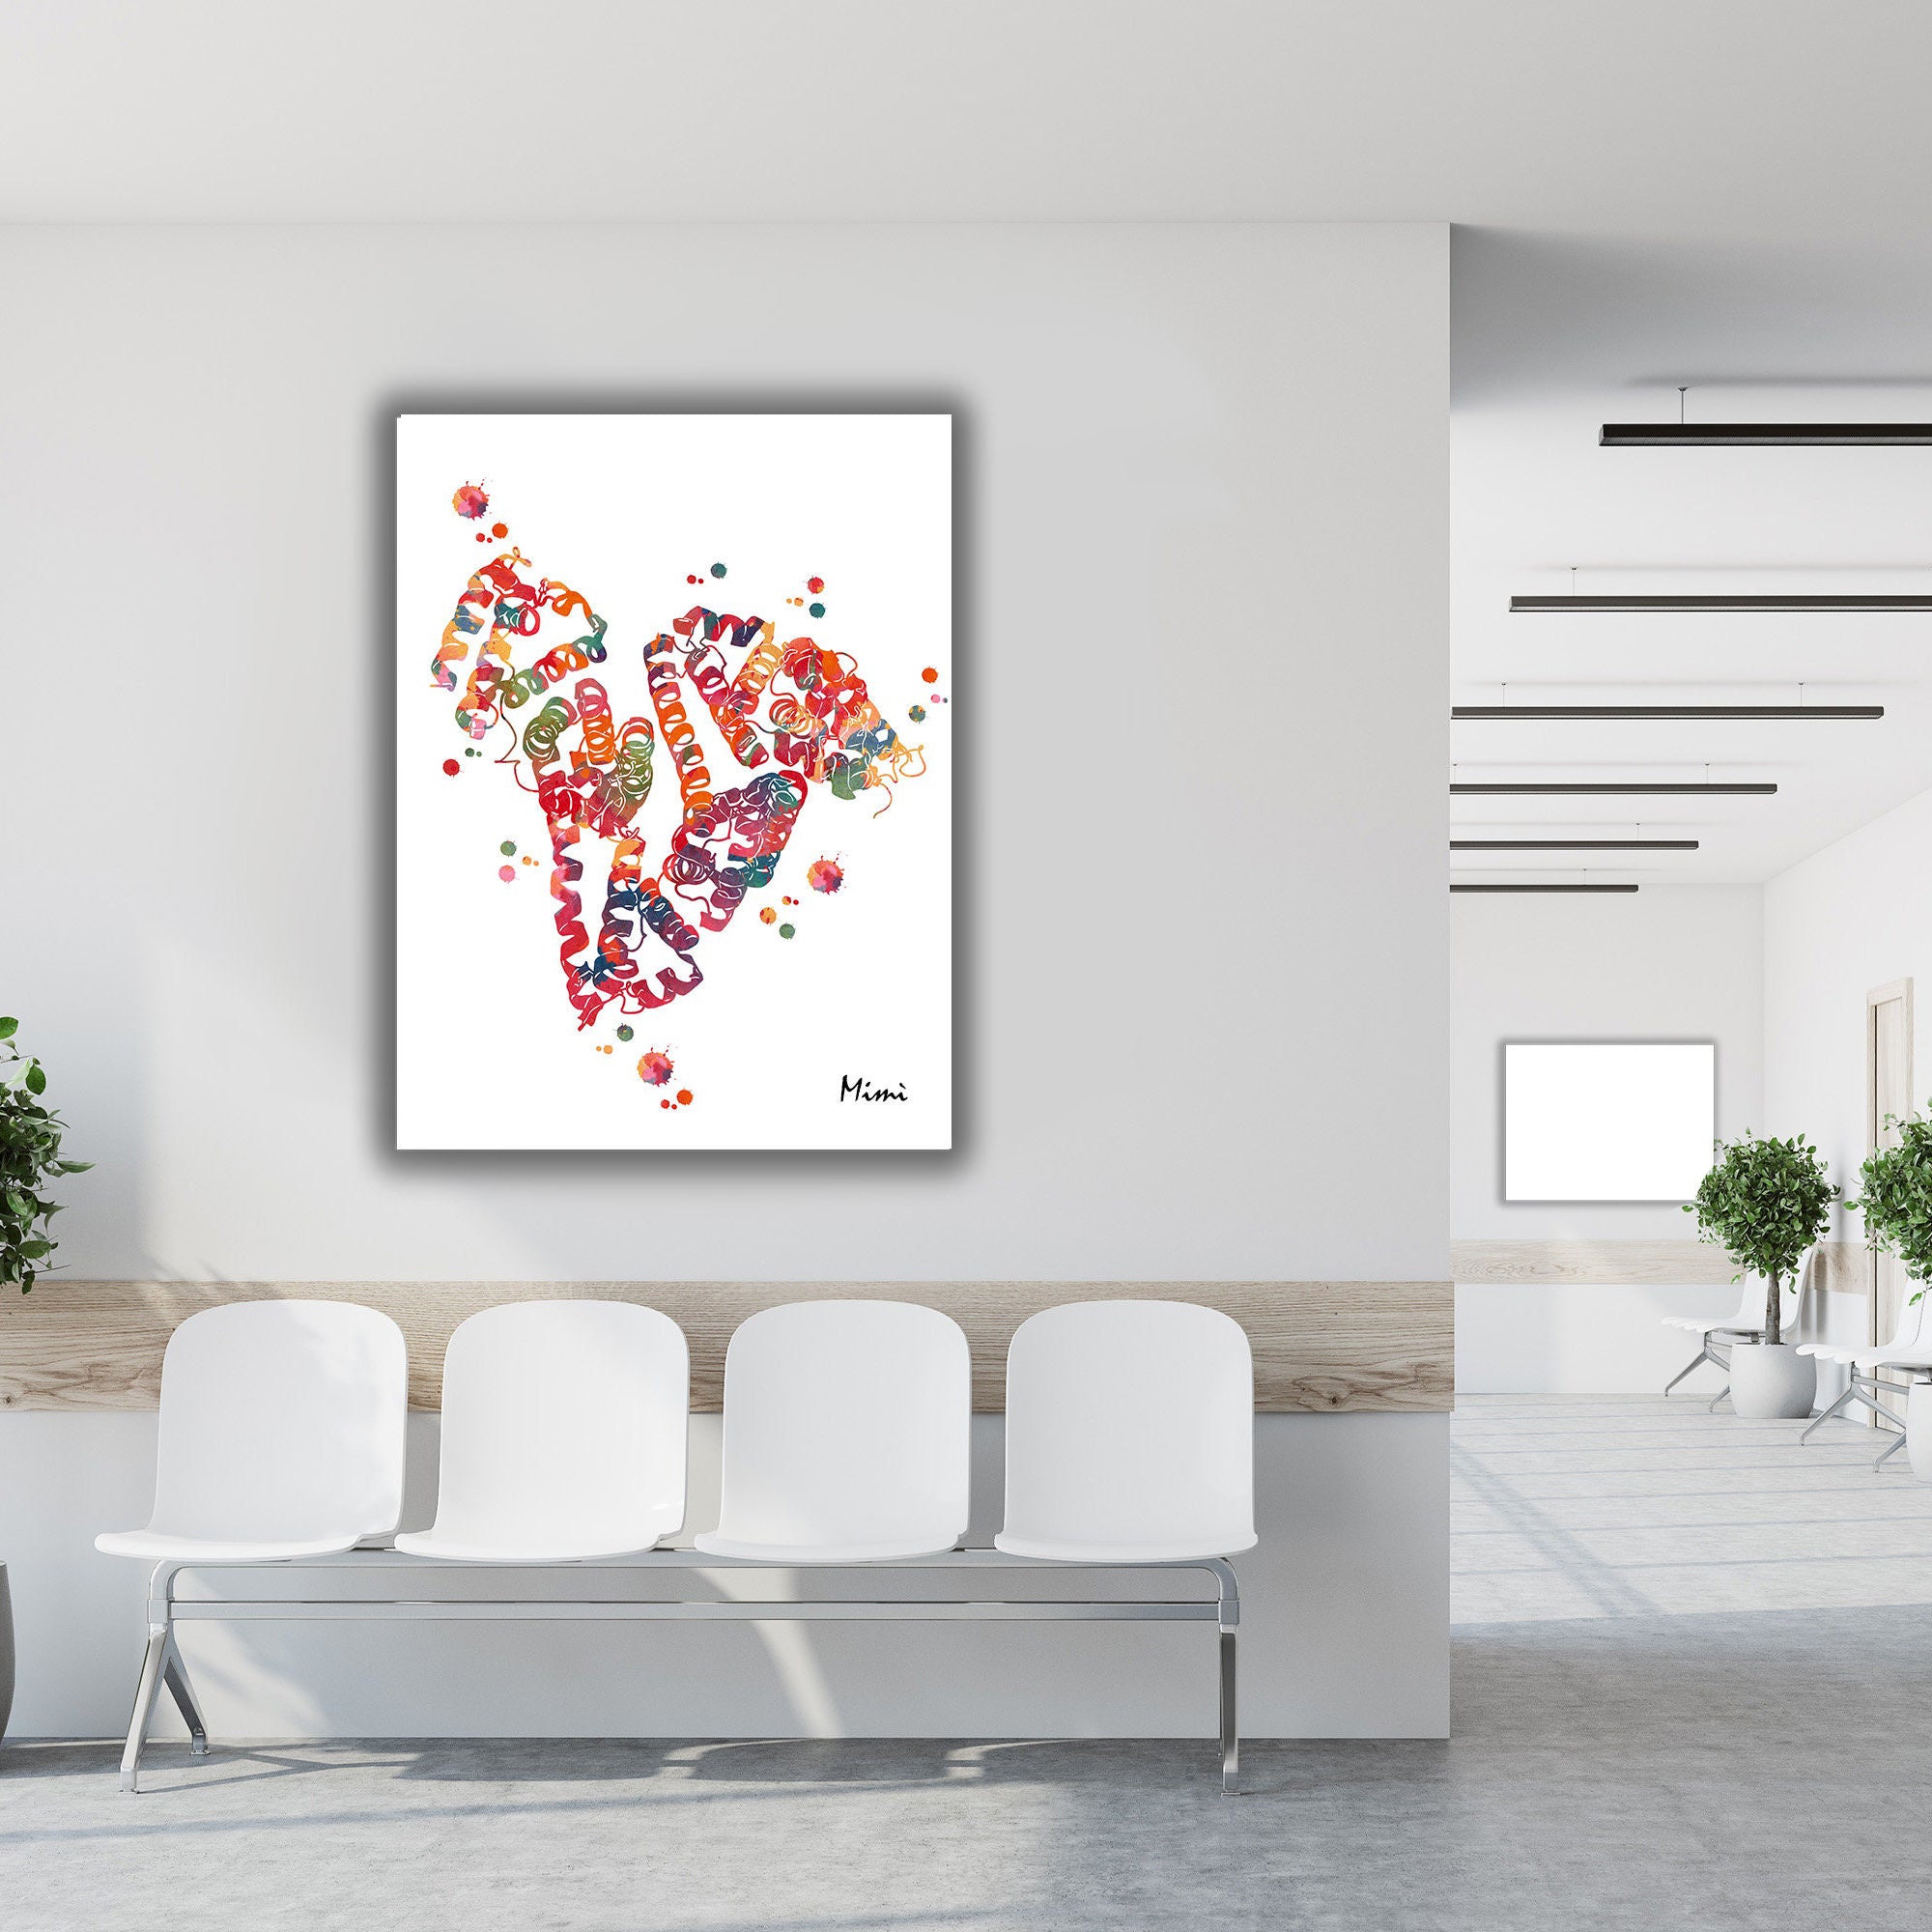 Fourth Image of Albumin Protein Molecular Structure Watercolor Print